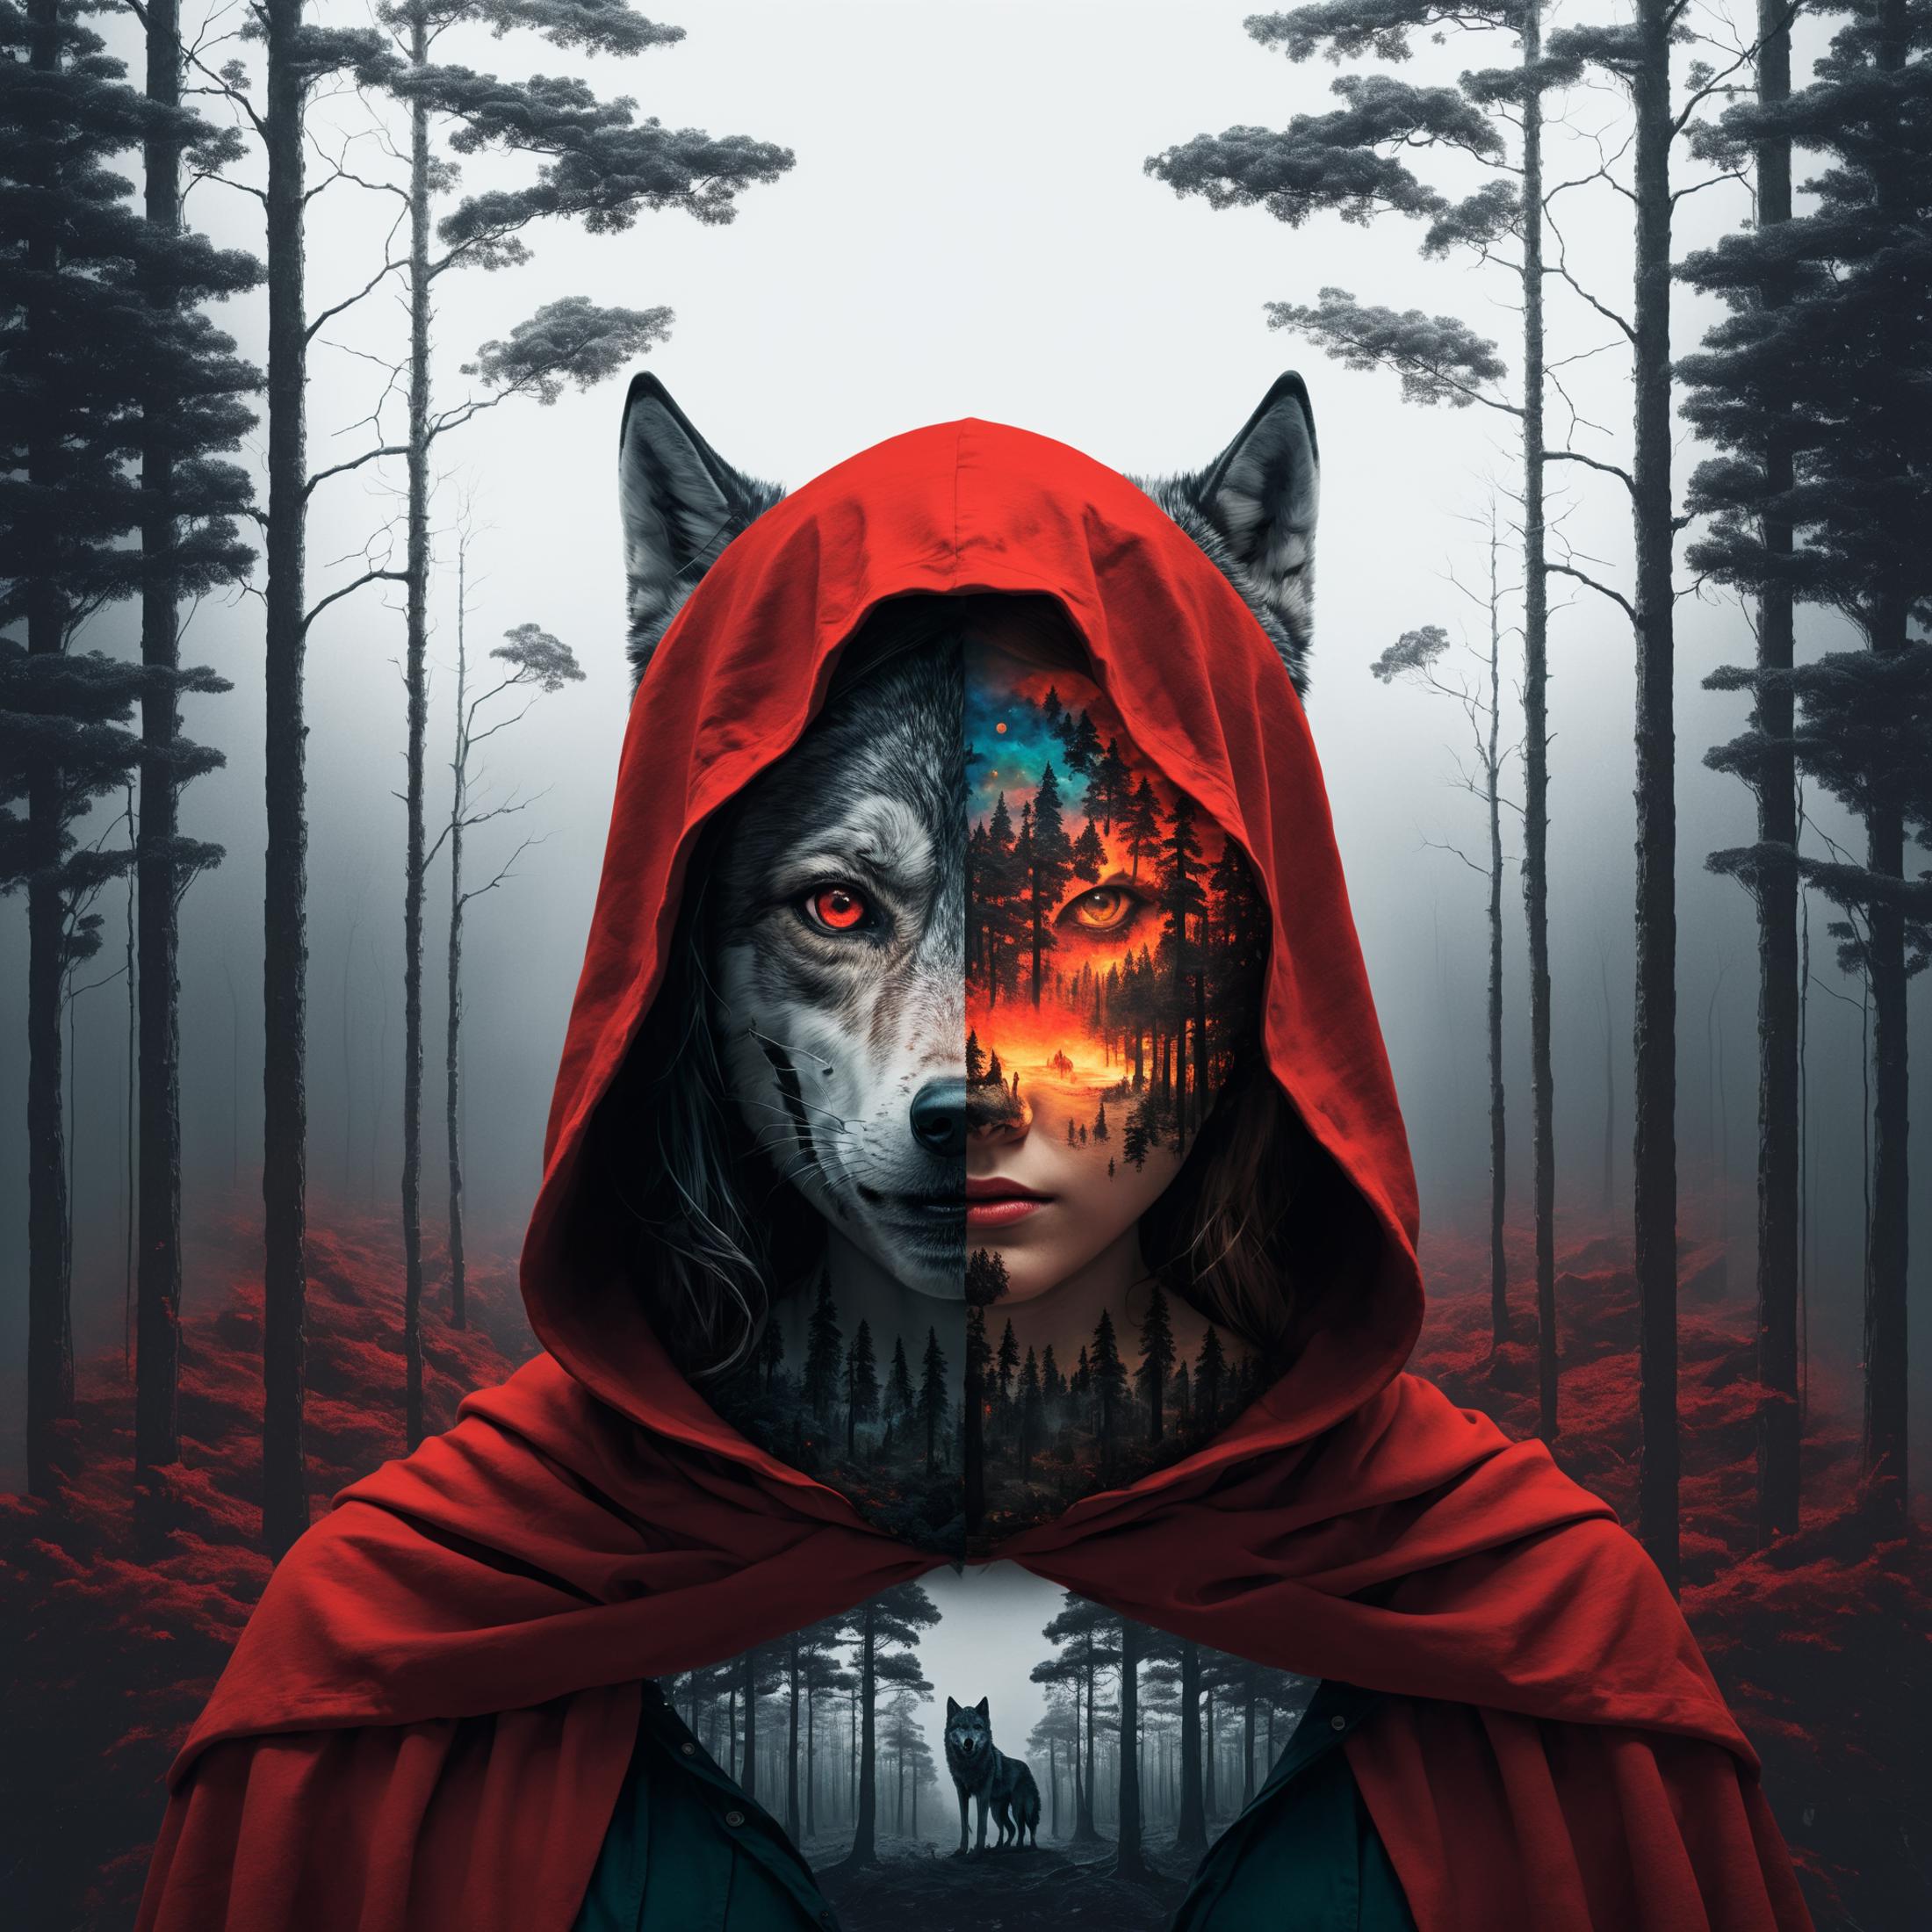 A person wearing a red hooded cloak with a wolf's face painted on it.